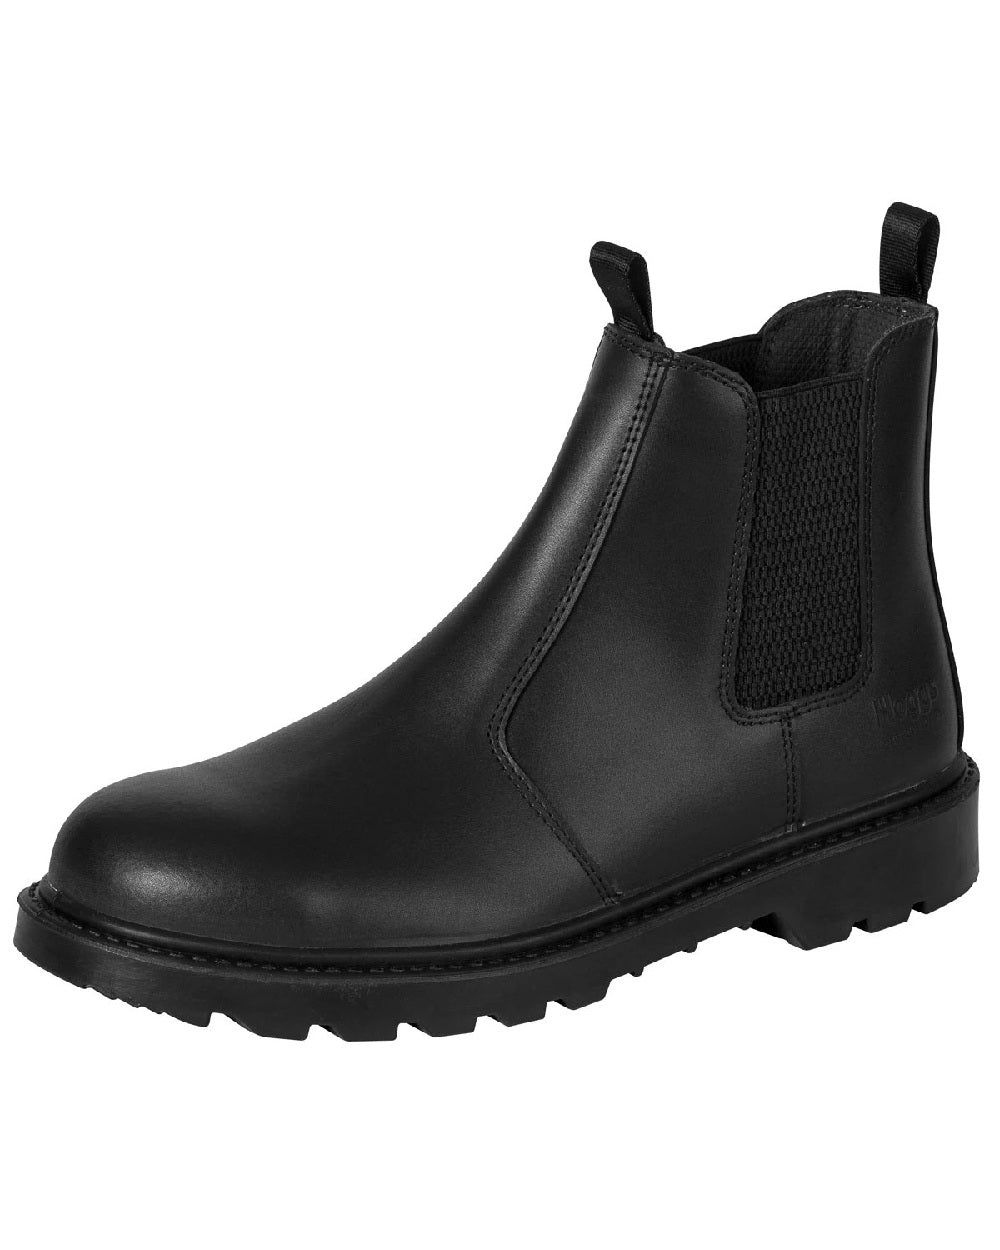 Black coloured Hoggs of Fife Classic Safety Dealer Boot on white background 